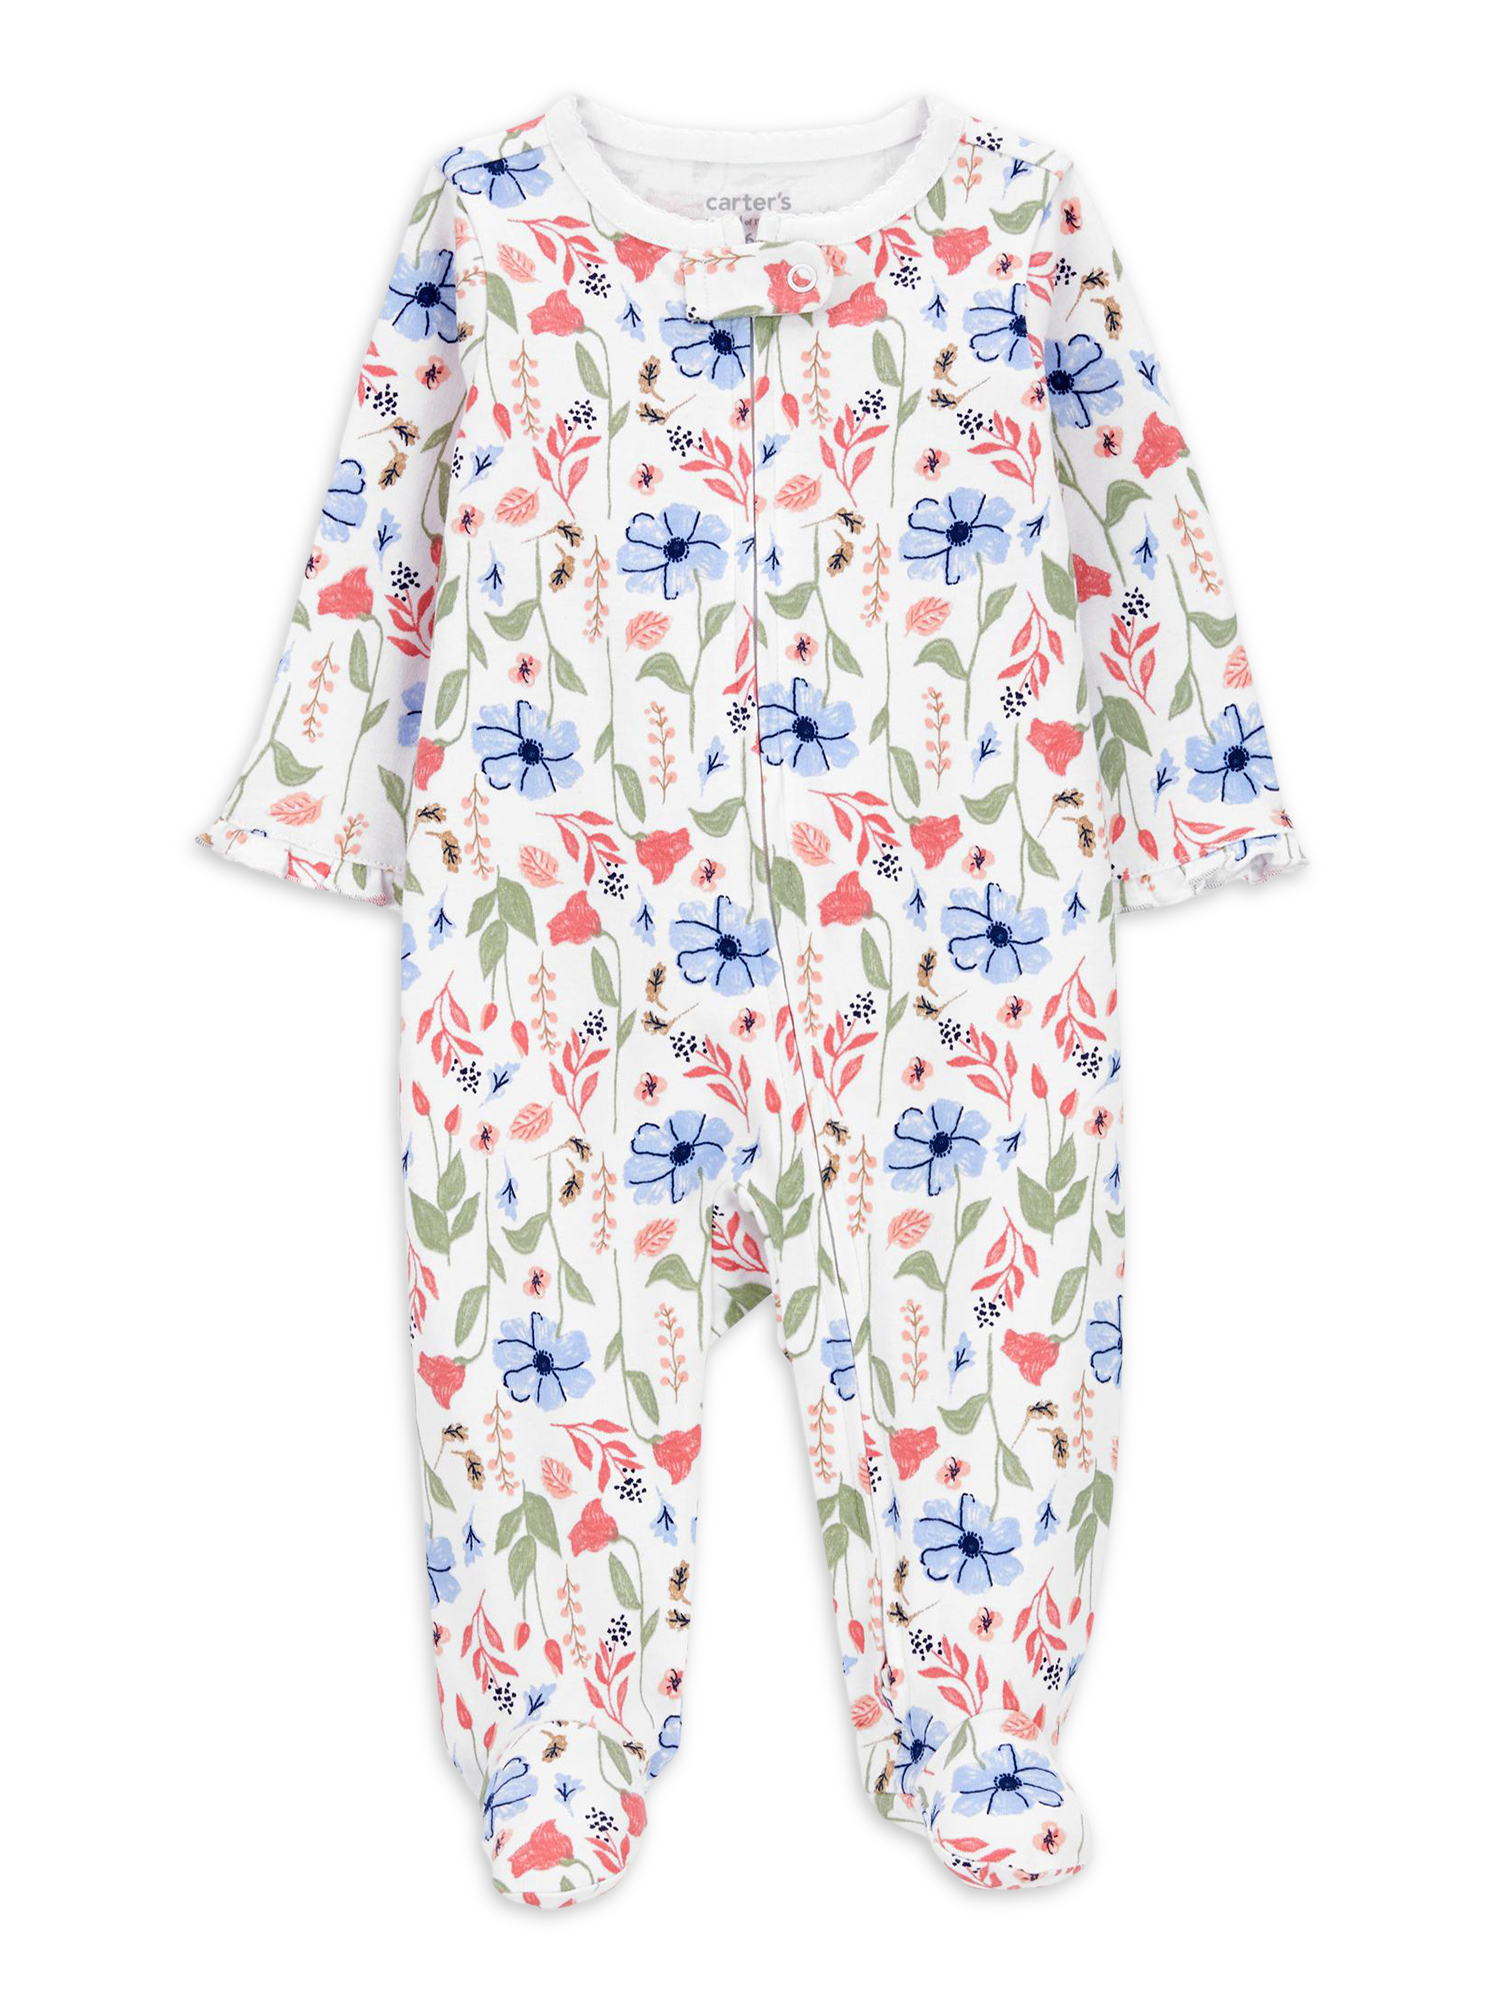 Carter's Child of Mine Baby Girl Sleep N Play, One-Piece, Sizes Preemie-6/9 Months - image 1 of 6